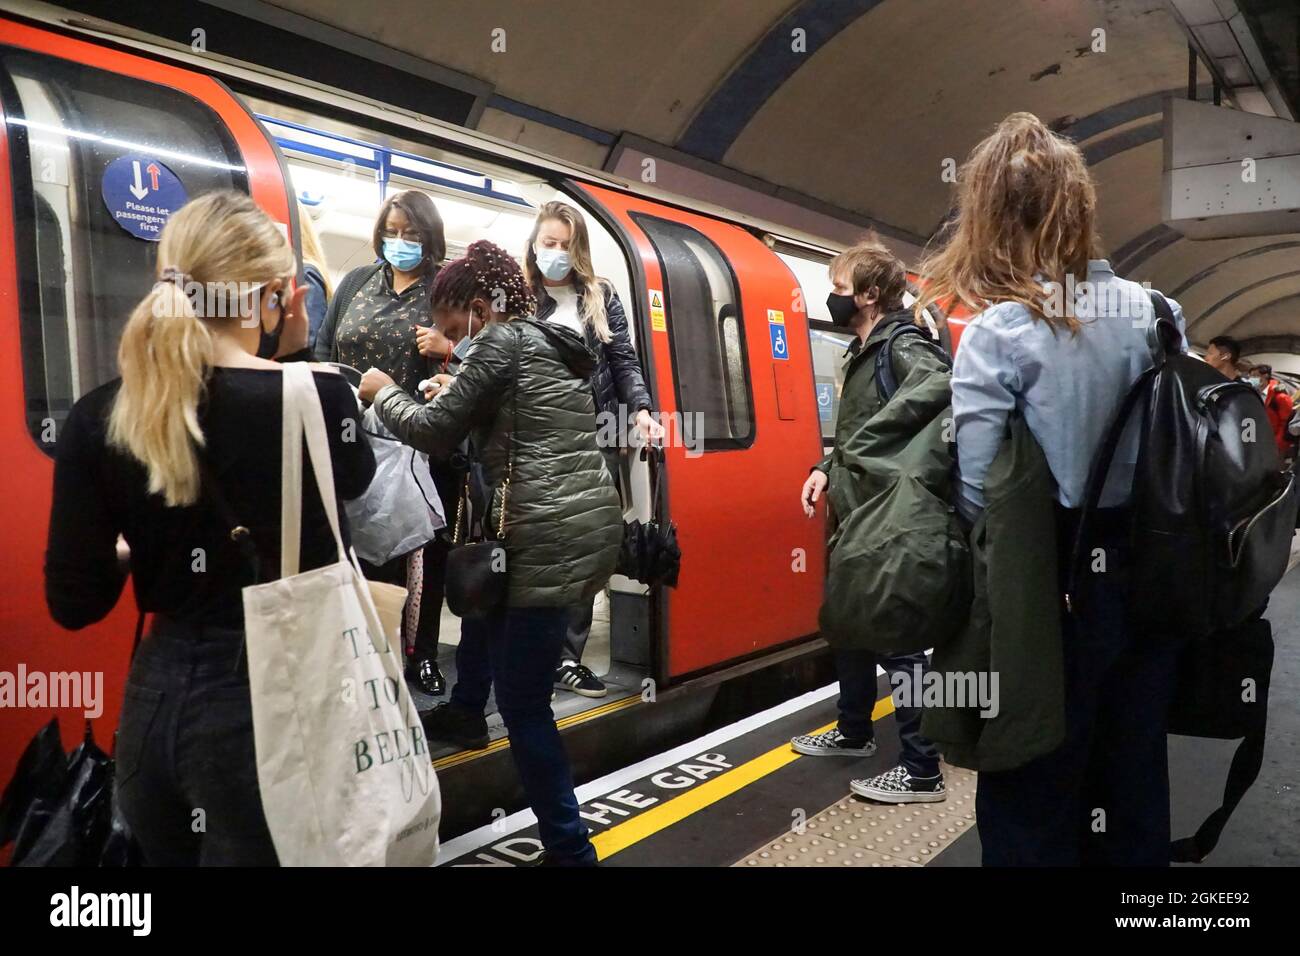 London, UK, 14 September 2021: as the government warns of the importance of personal responsibility in preventing a severe wave of Covid cases in the winter, most but not all passengers follow the rules and wear face coverings on the London Underground. Face masks are not required if a passenger has a medical reason for an exemption but increasing numbers of people seem to be without them. Anna Watson/Alamy Live News Stock Photo